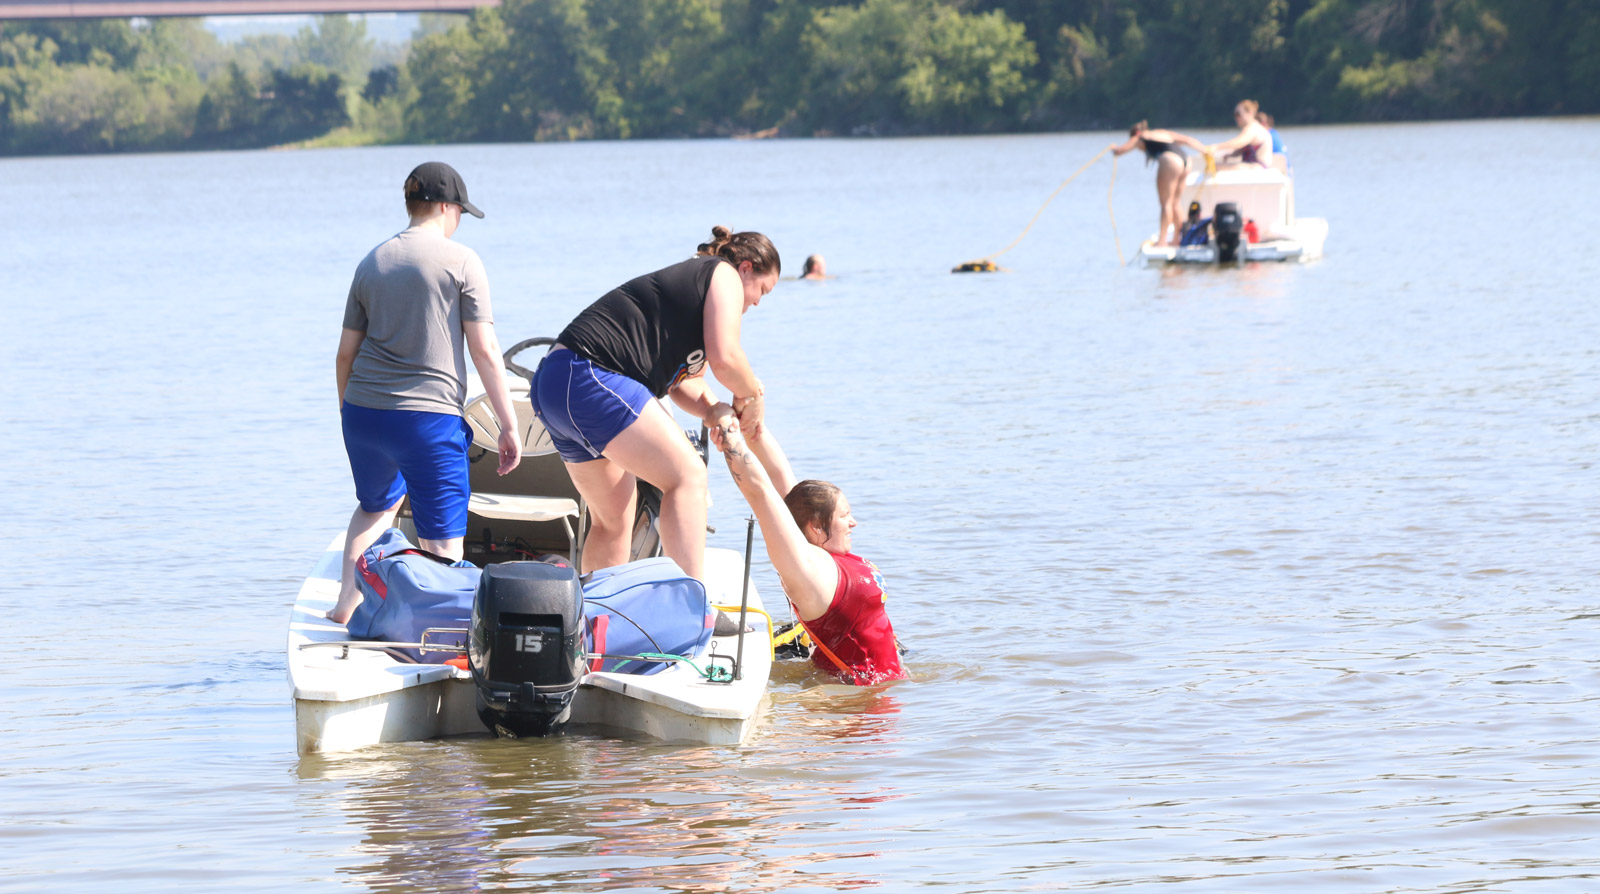 Kansas Fire & Rescue Training Institute partners with Kansas Rowing for customized water safety course 